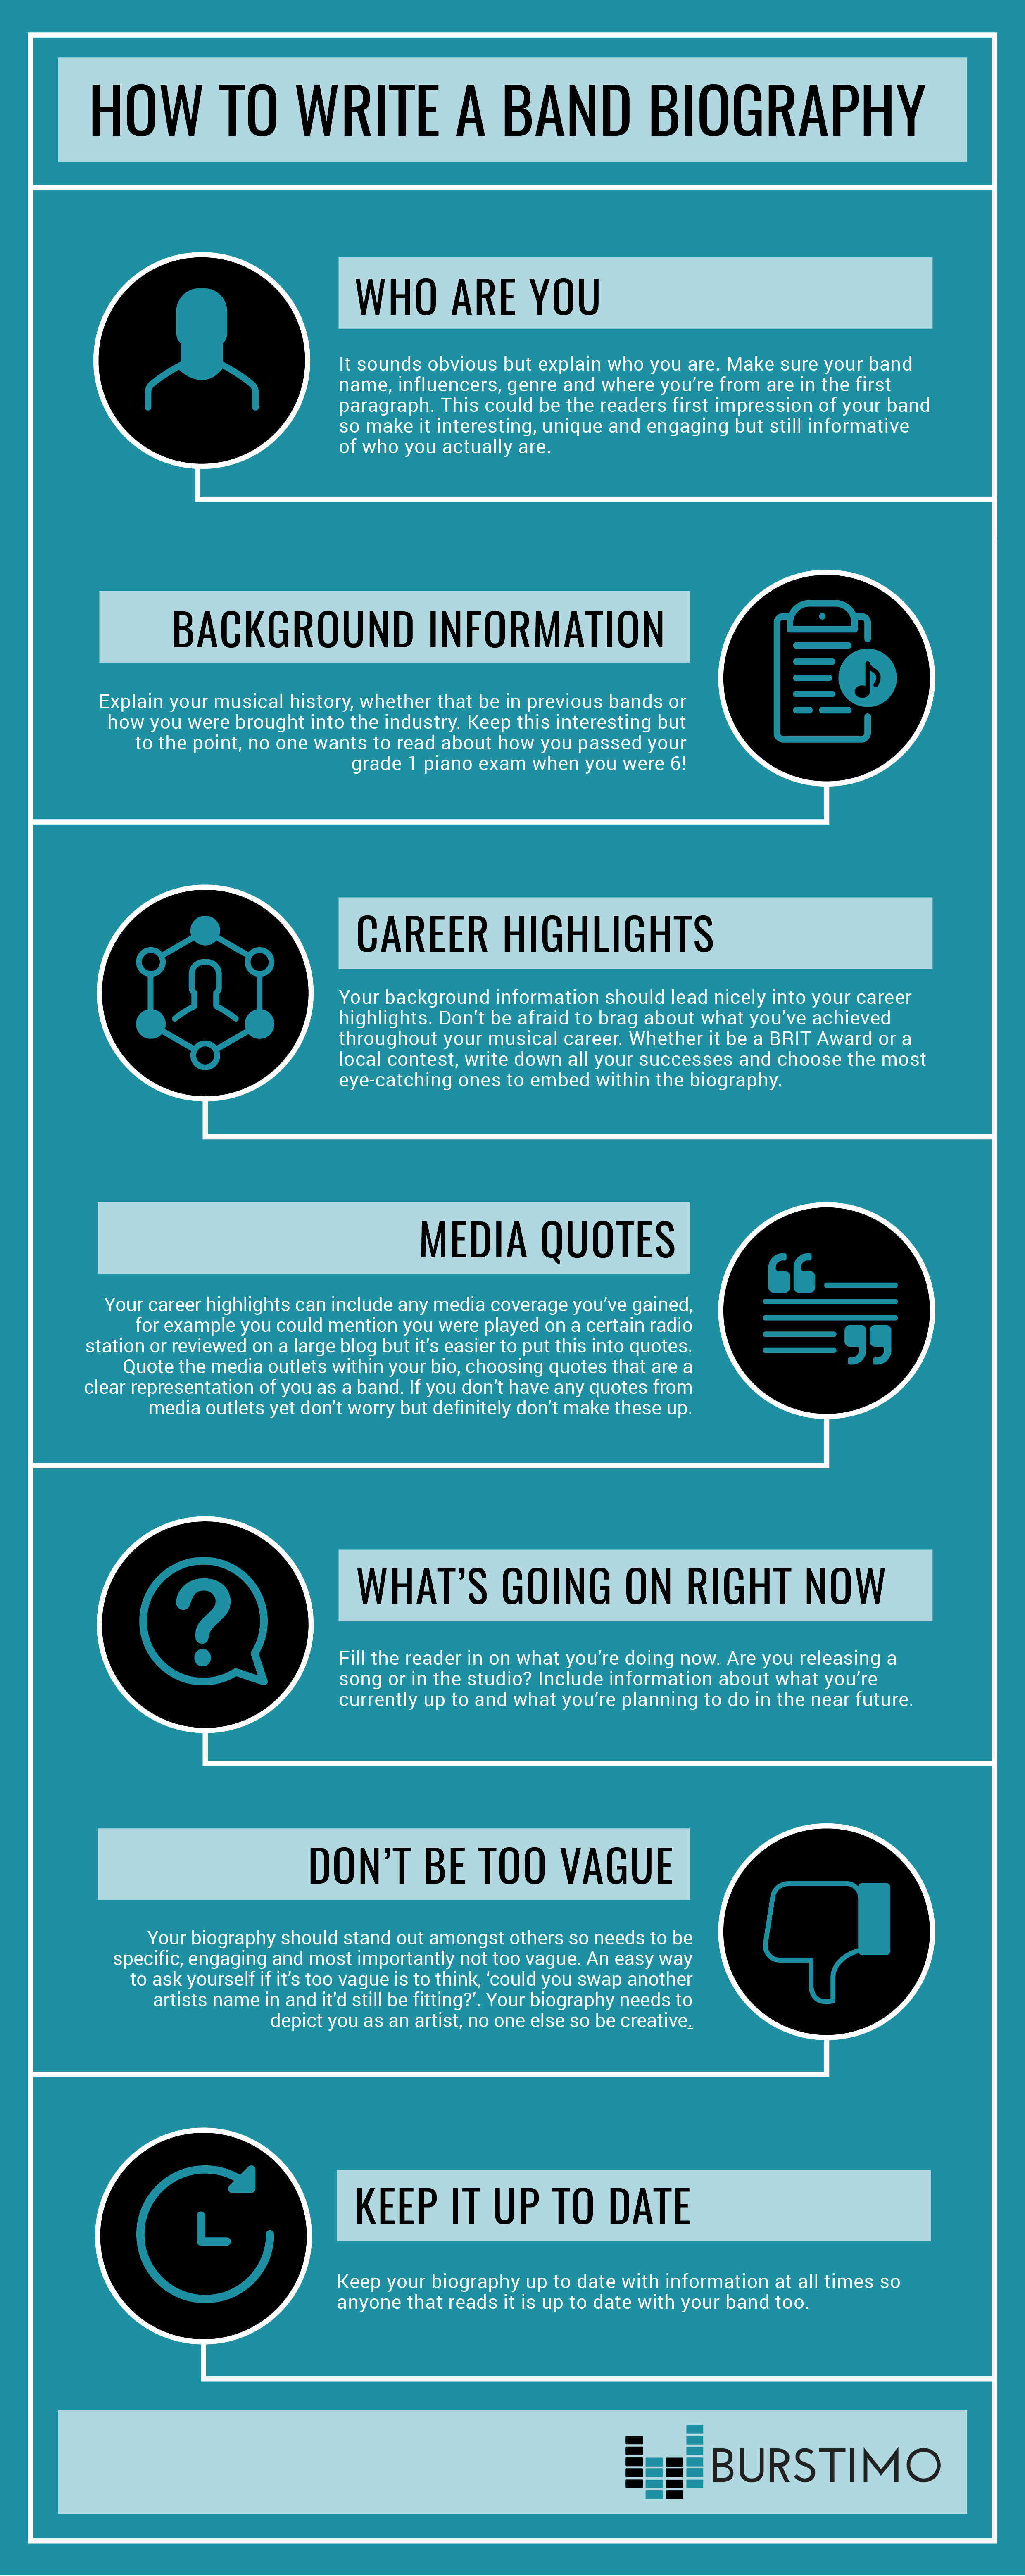 How To Write A Great Band Bio [INFOGRAPHIC] - Hypebot